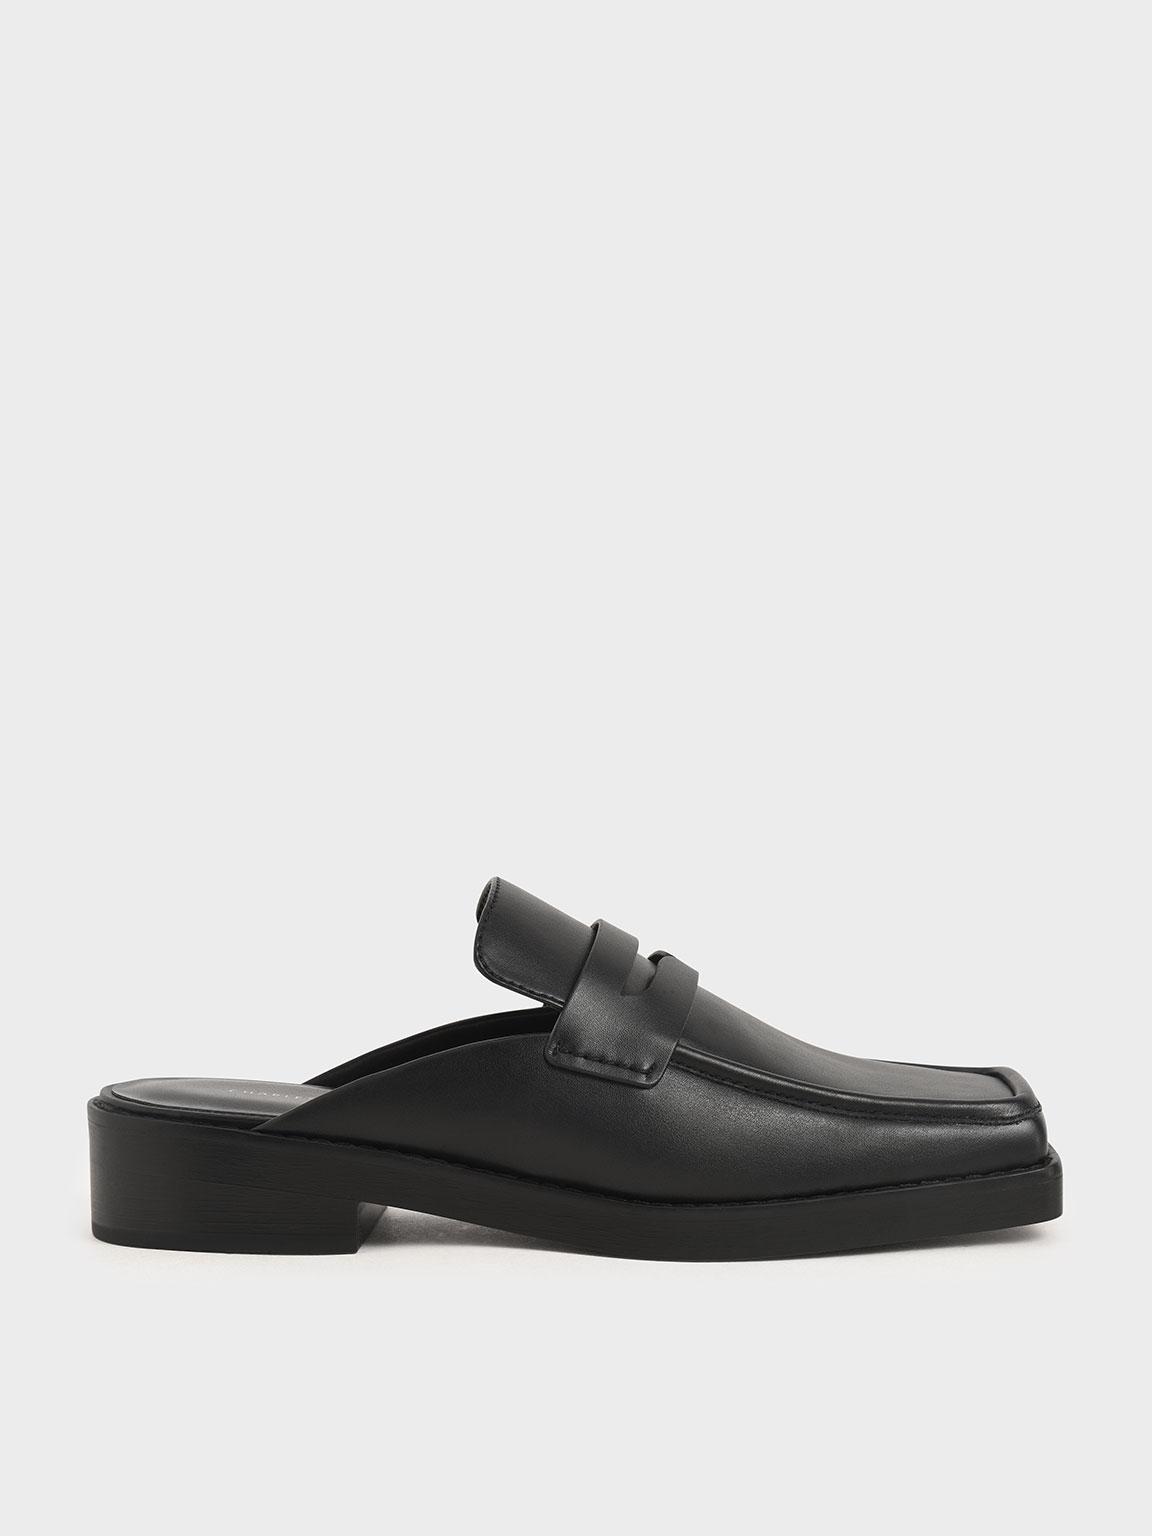 Charles & Keith Square Toe Penny Loafer Mules in Black - Lyst